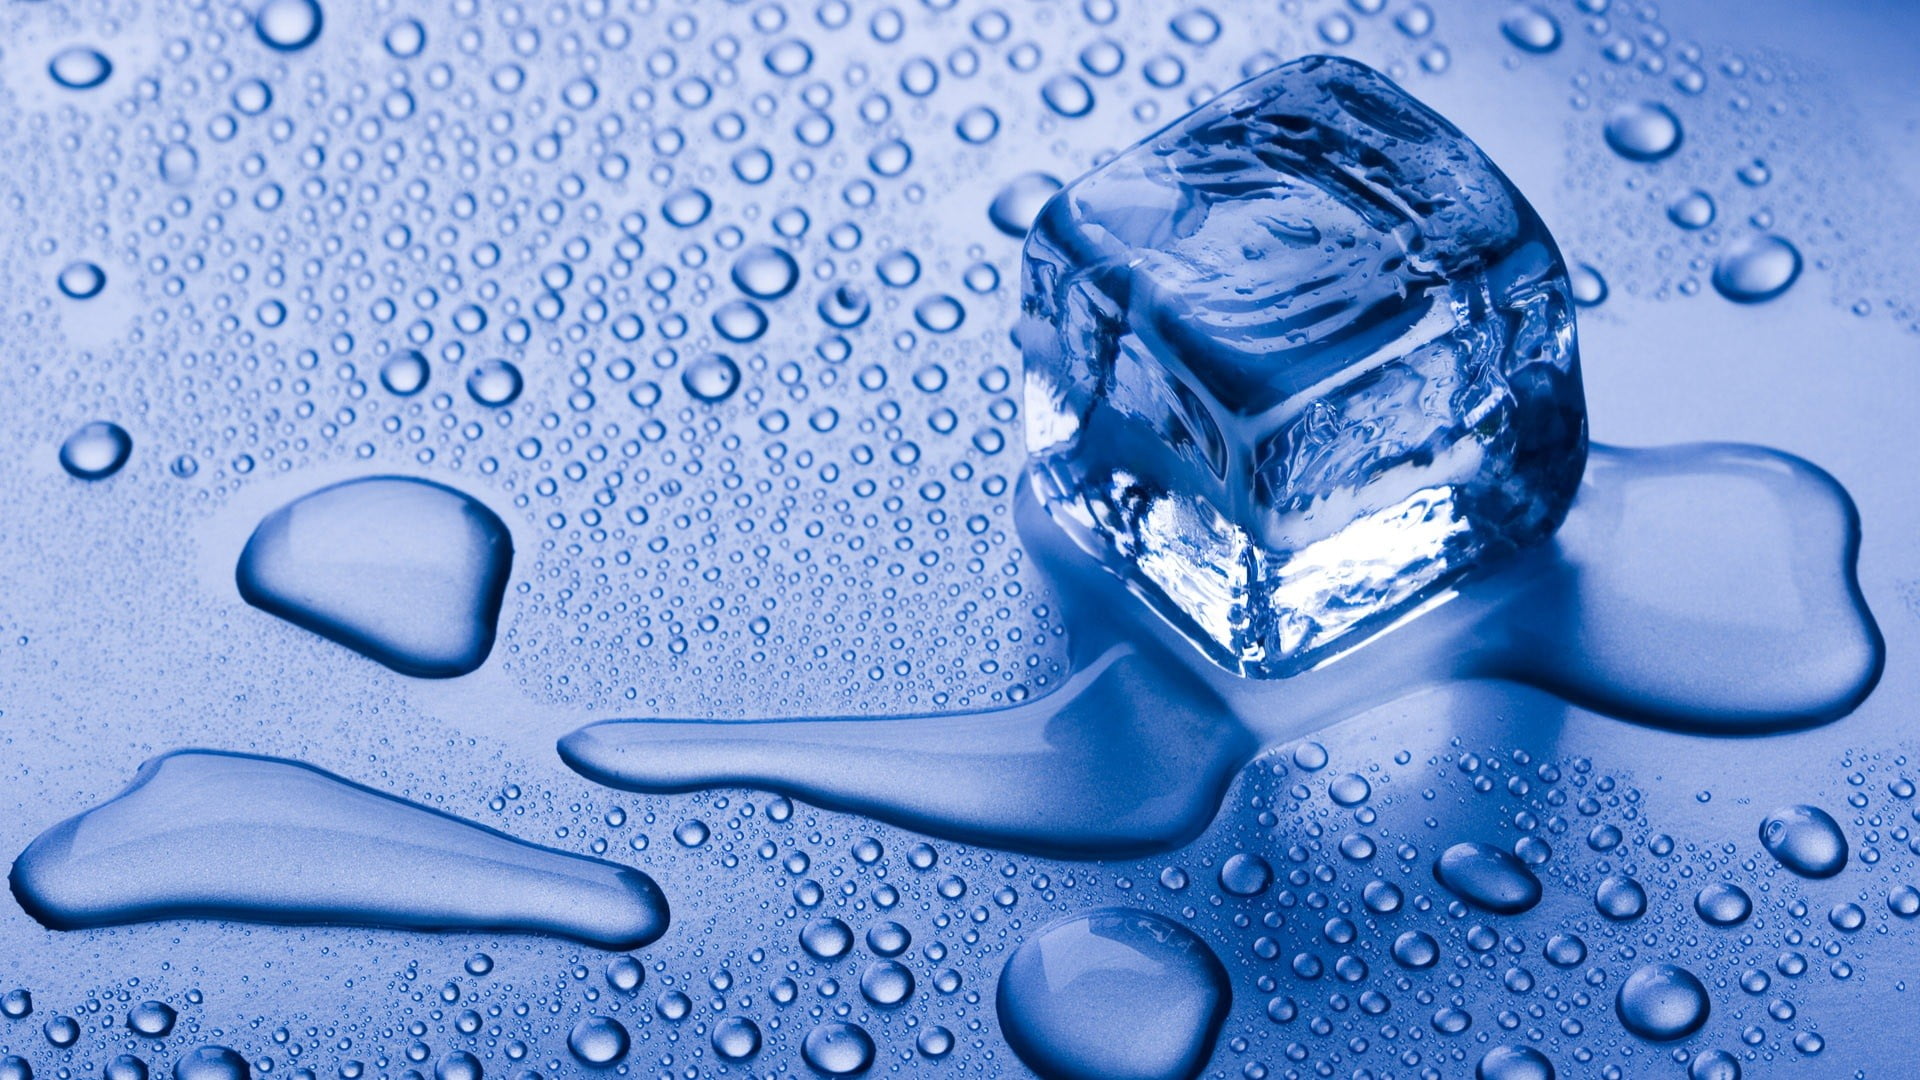 ice cube, water drops, blue, ice cubes, wet, melting, close-up